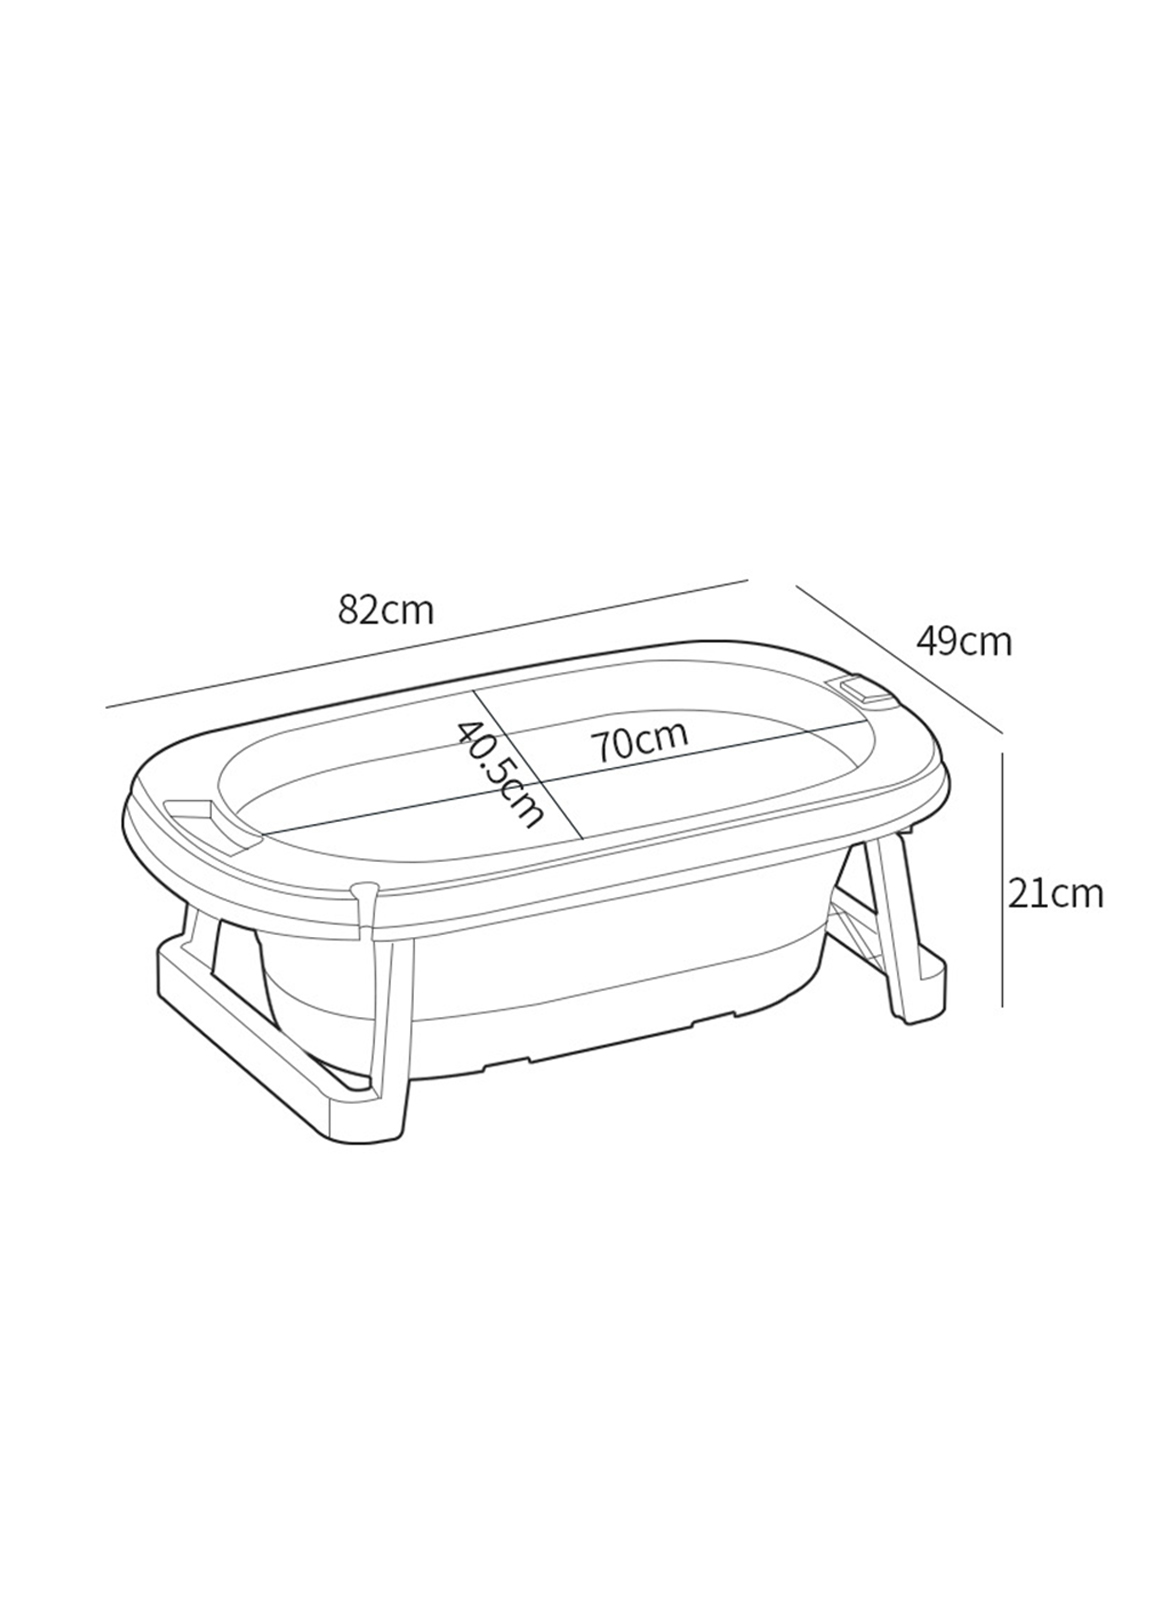 Children's Folding Bathtub with Cushion and Thermometer